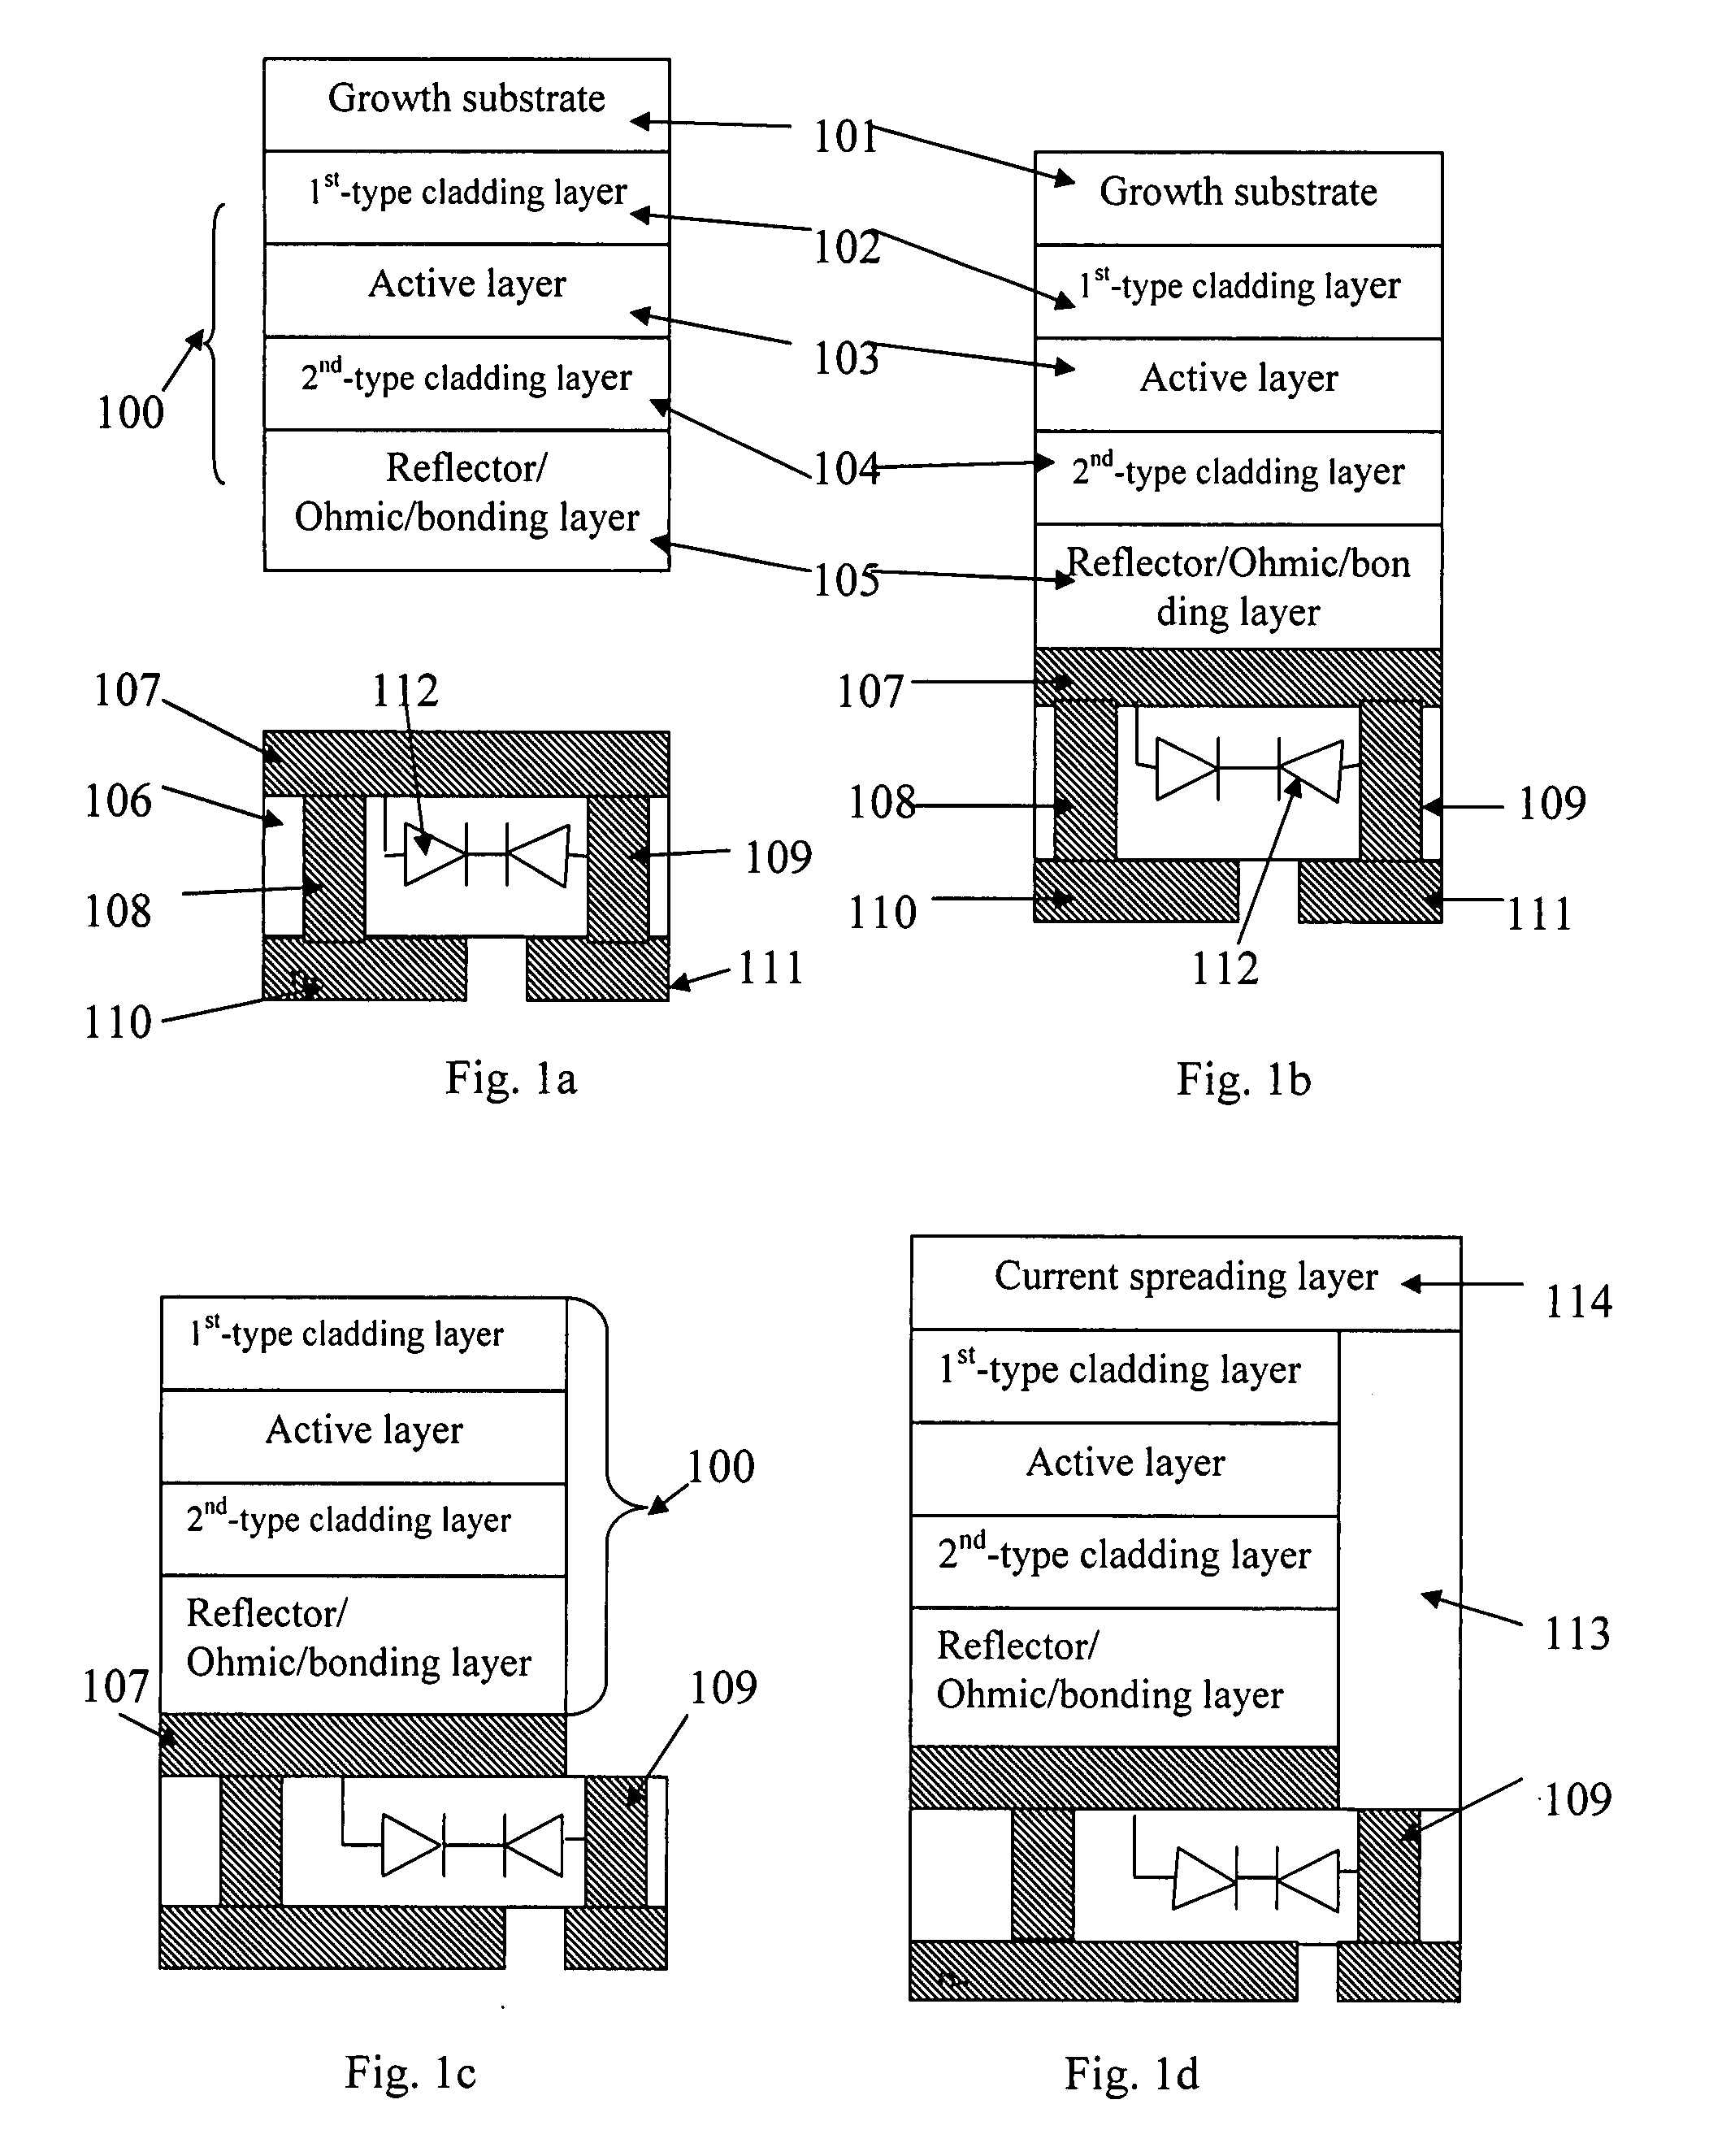 Through-hole vertical semiconductor devices or chips